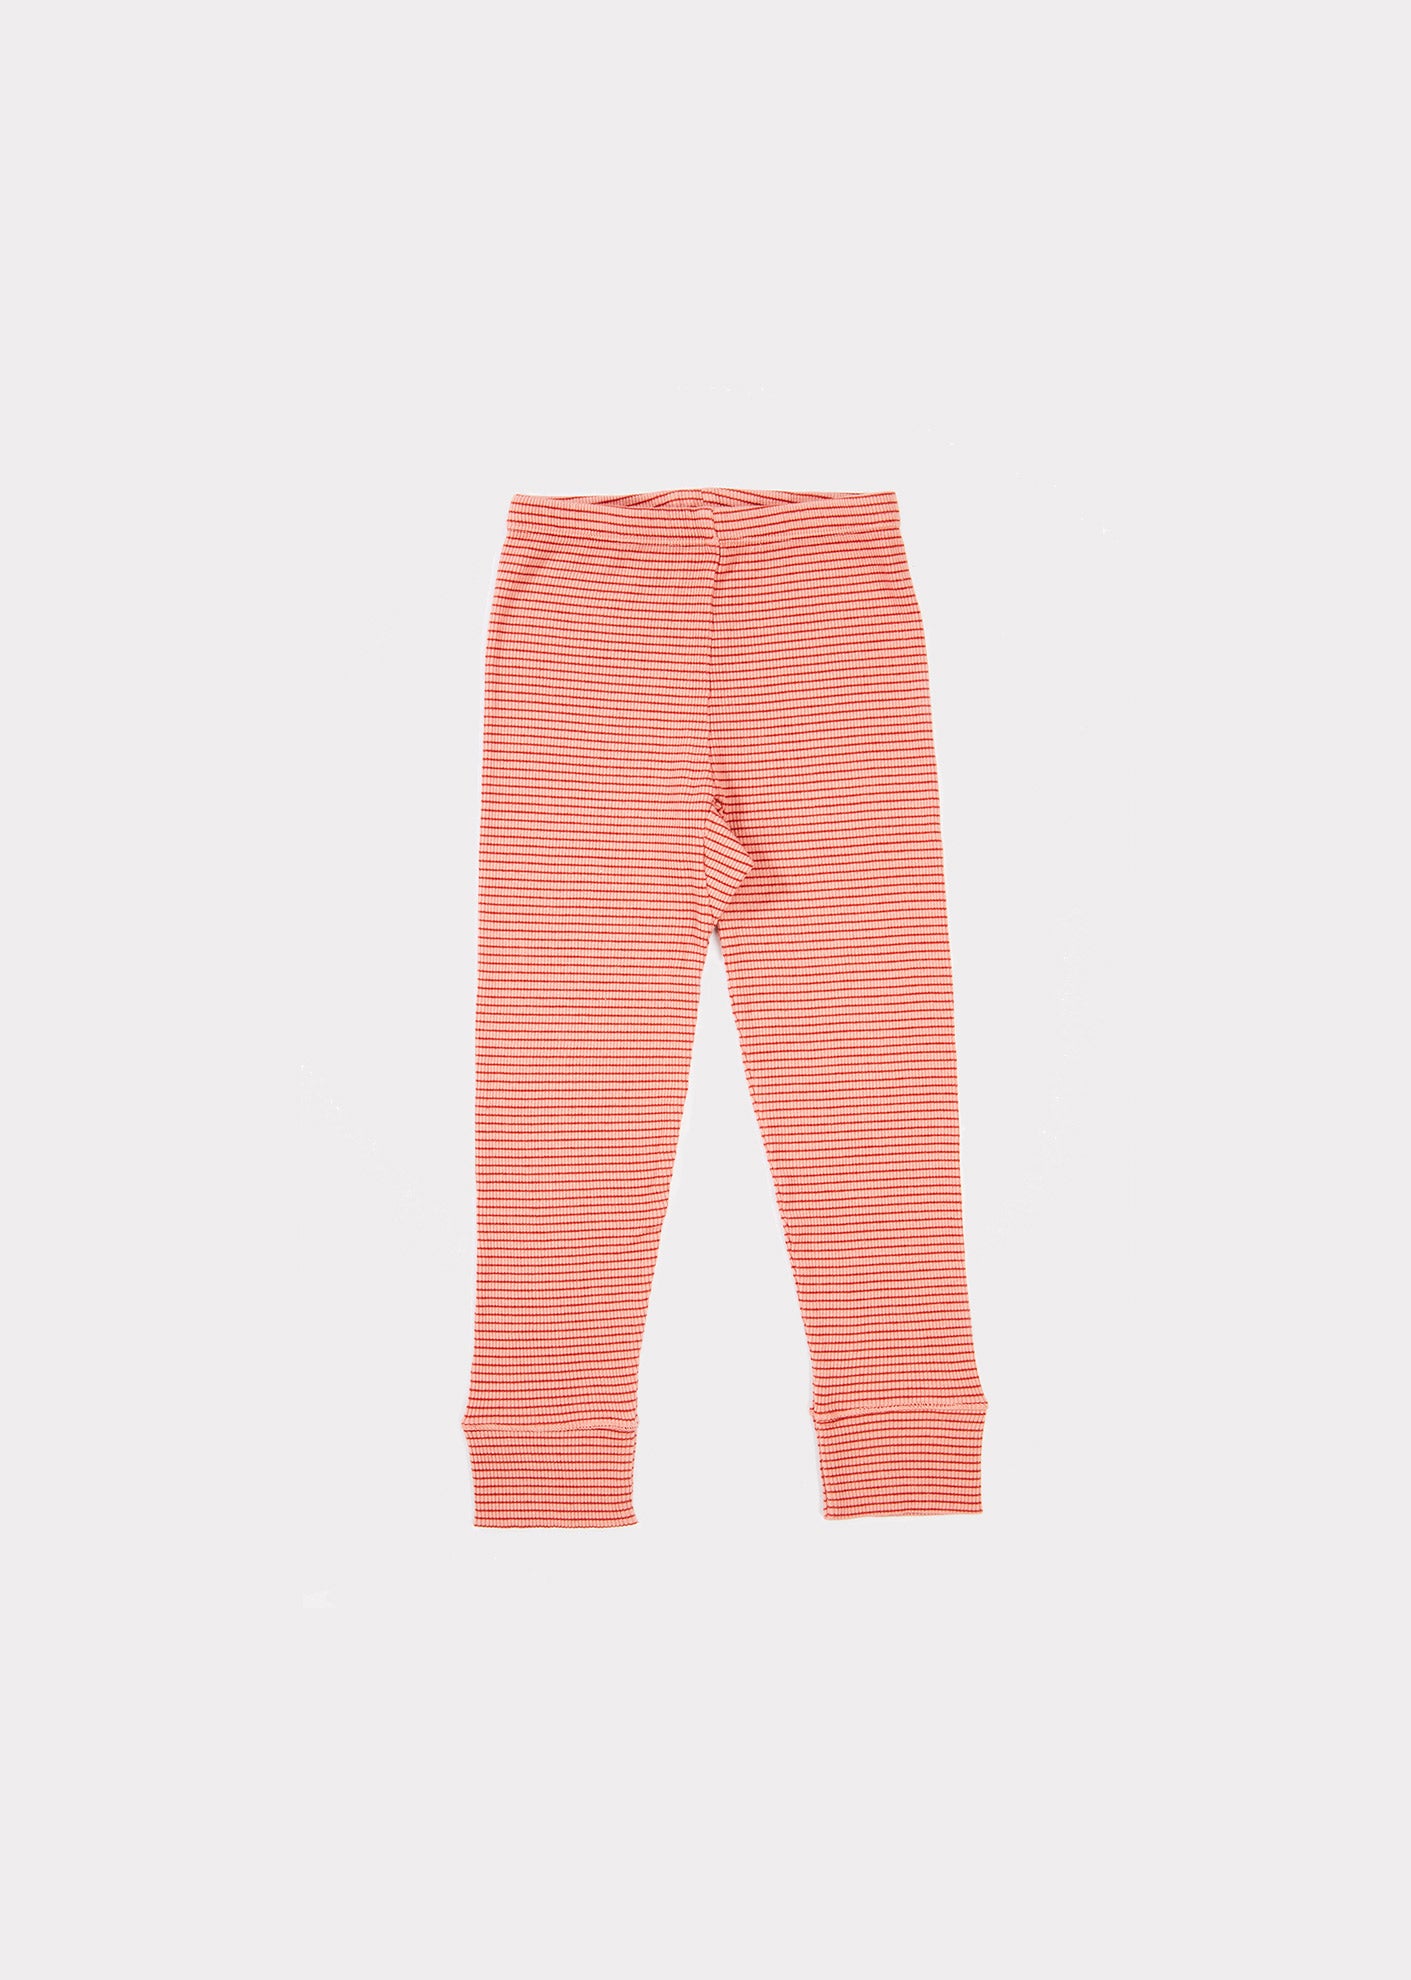 Girls Pink Striped Cotton Trousers